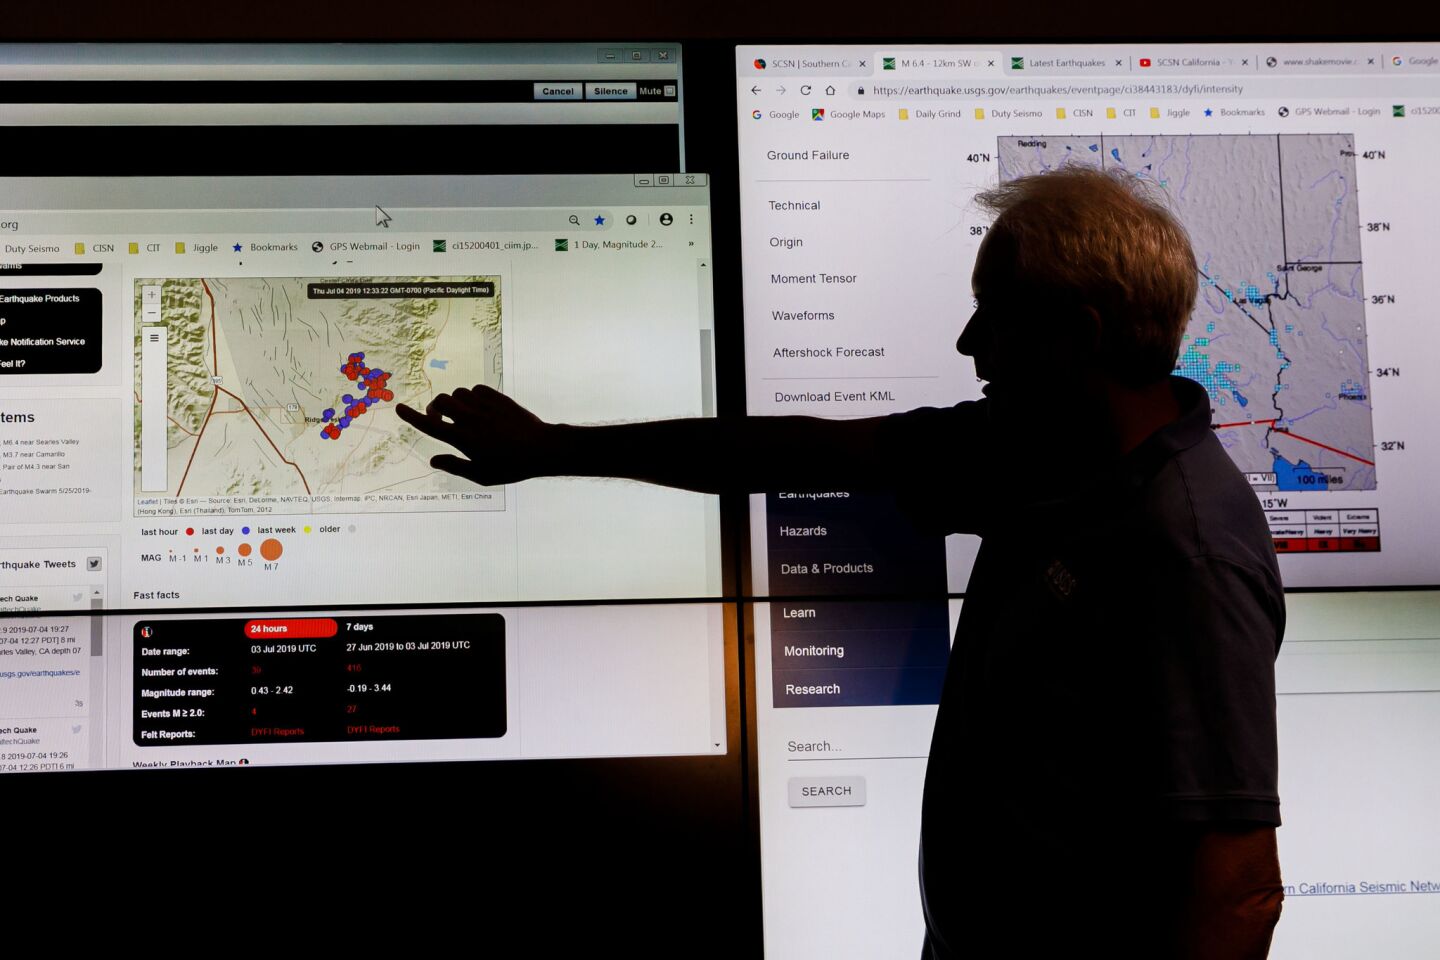 U.S. Geological Survey seismologist Robert Graves points to a map showing where two fault lines caused the earthquake during a news conference at Caltech in Pasadena.